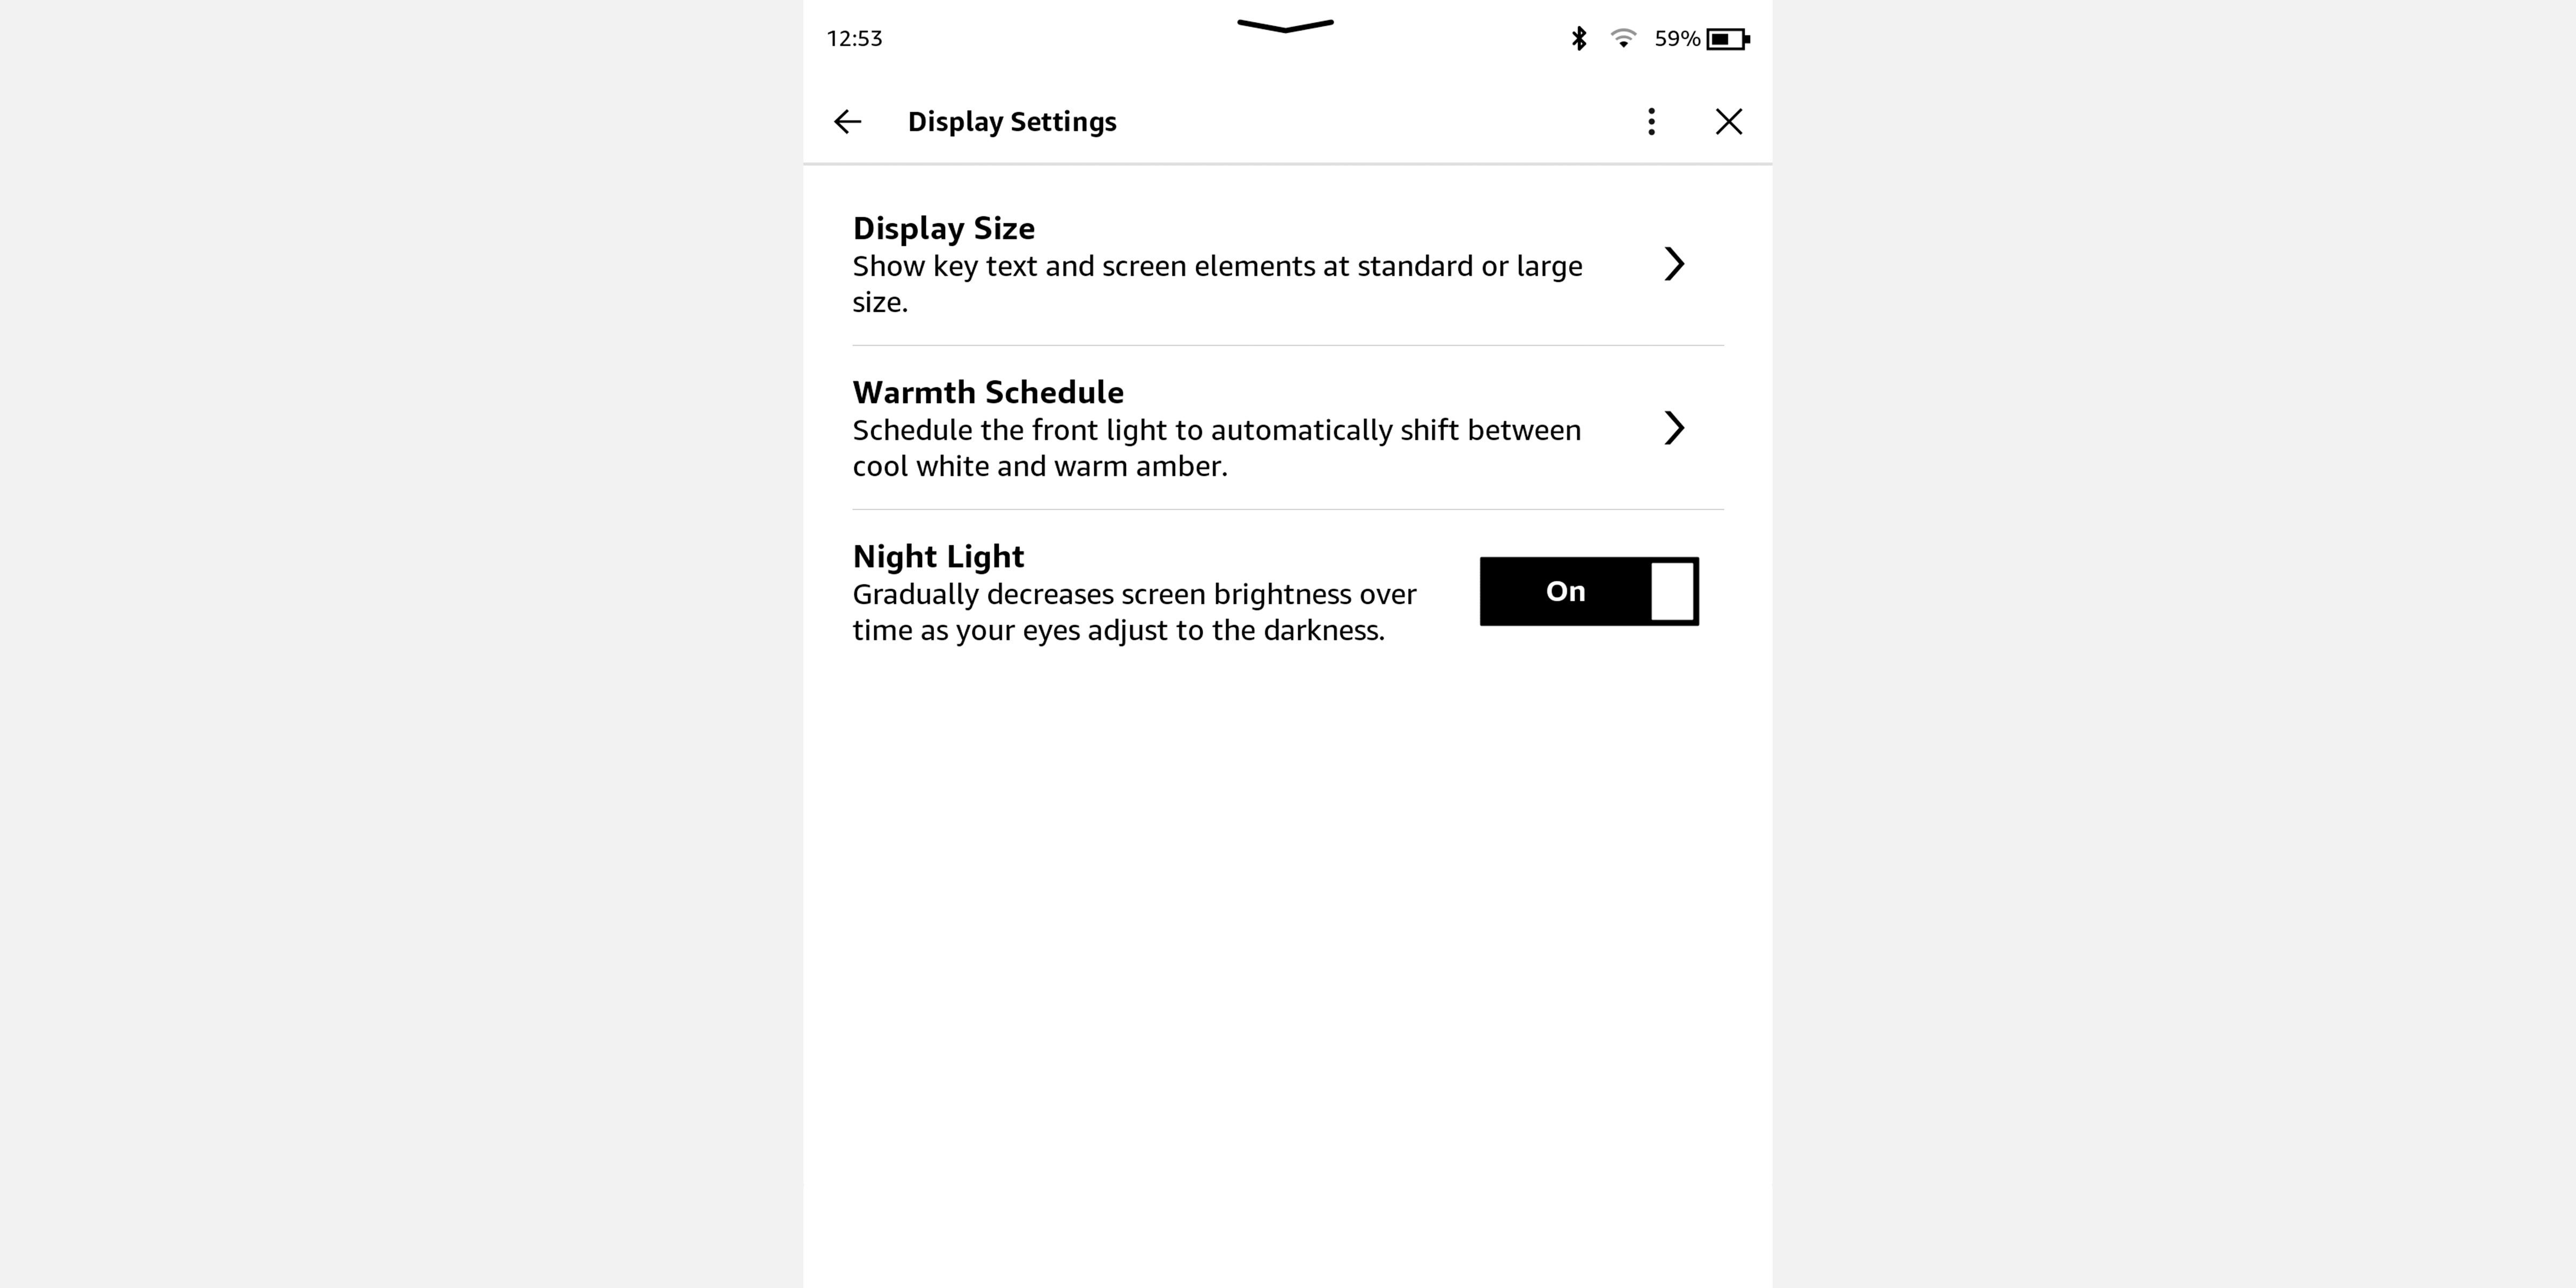 Screenshot of Kindle Oasis showing Night Light feature in menu